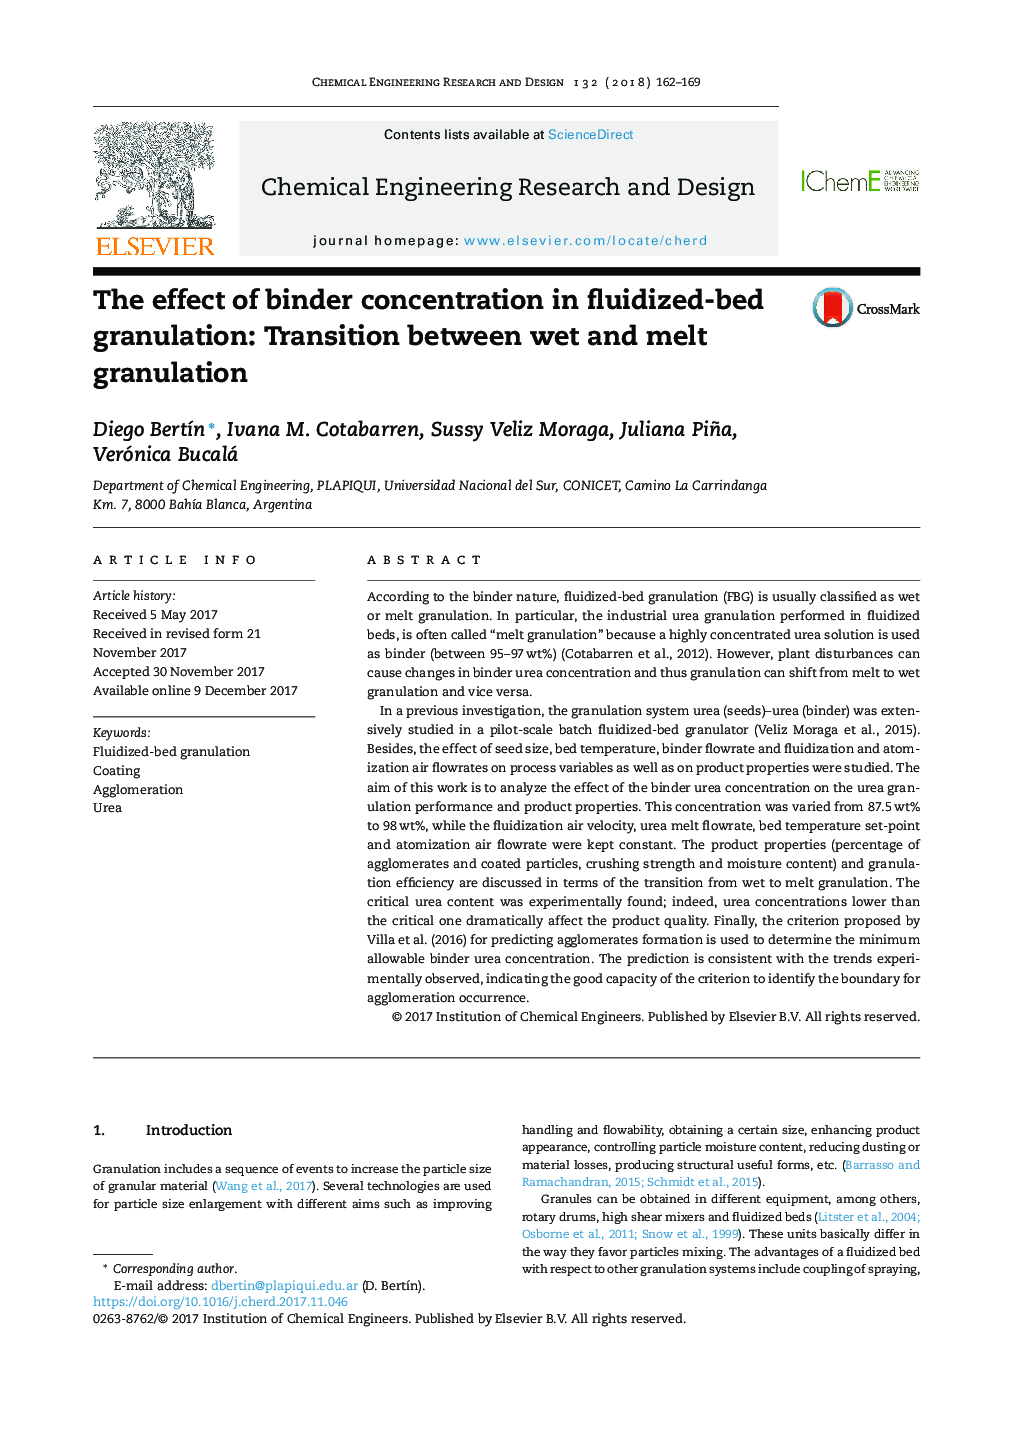 The effect of binder concentration in fluidized-bed granulation: Transition between wet and melt granulation